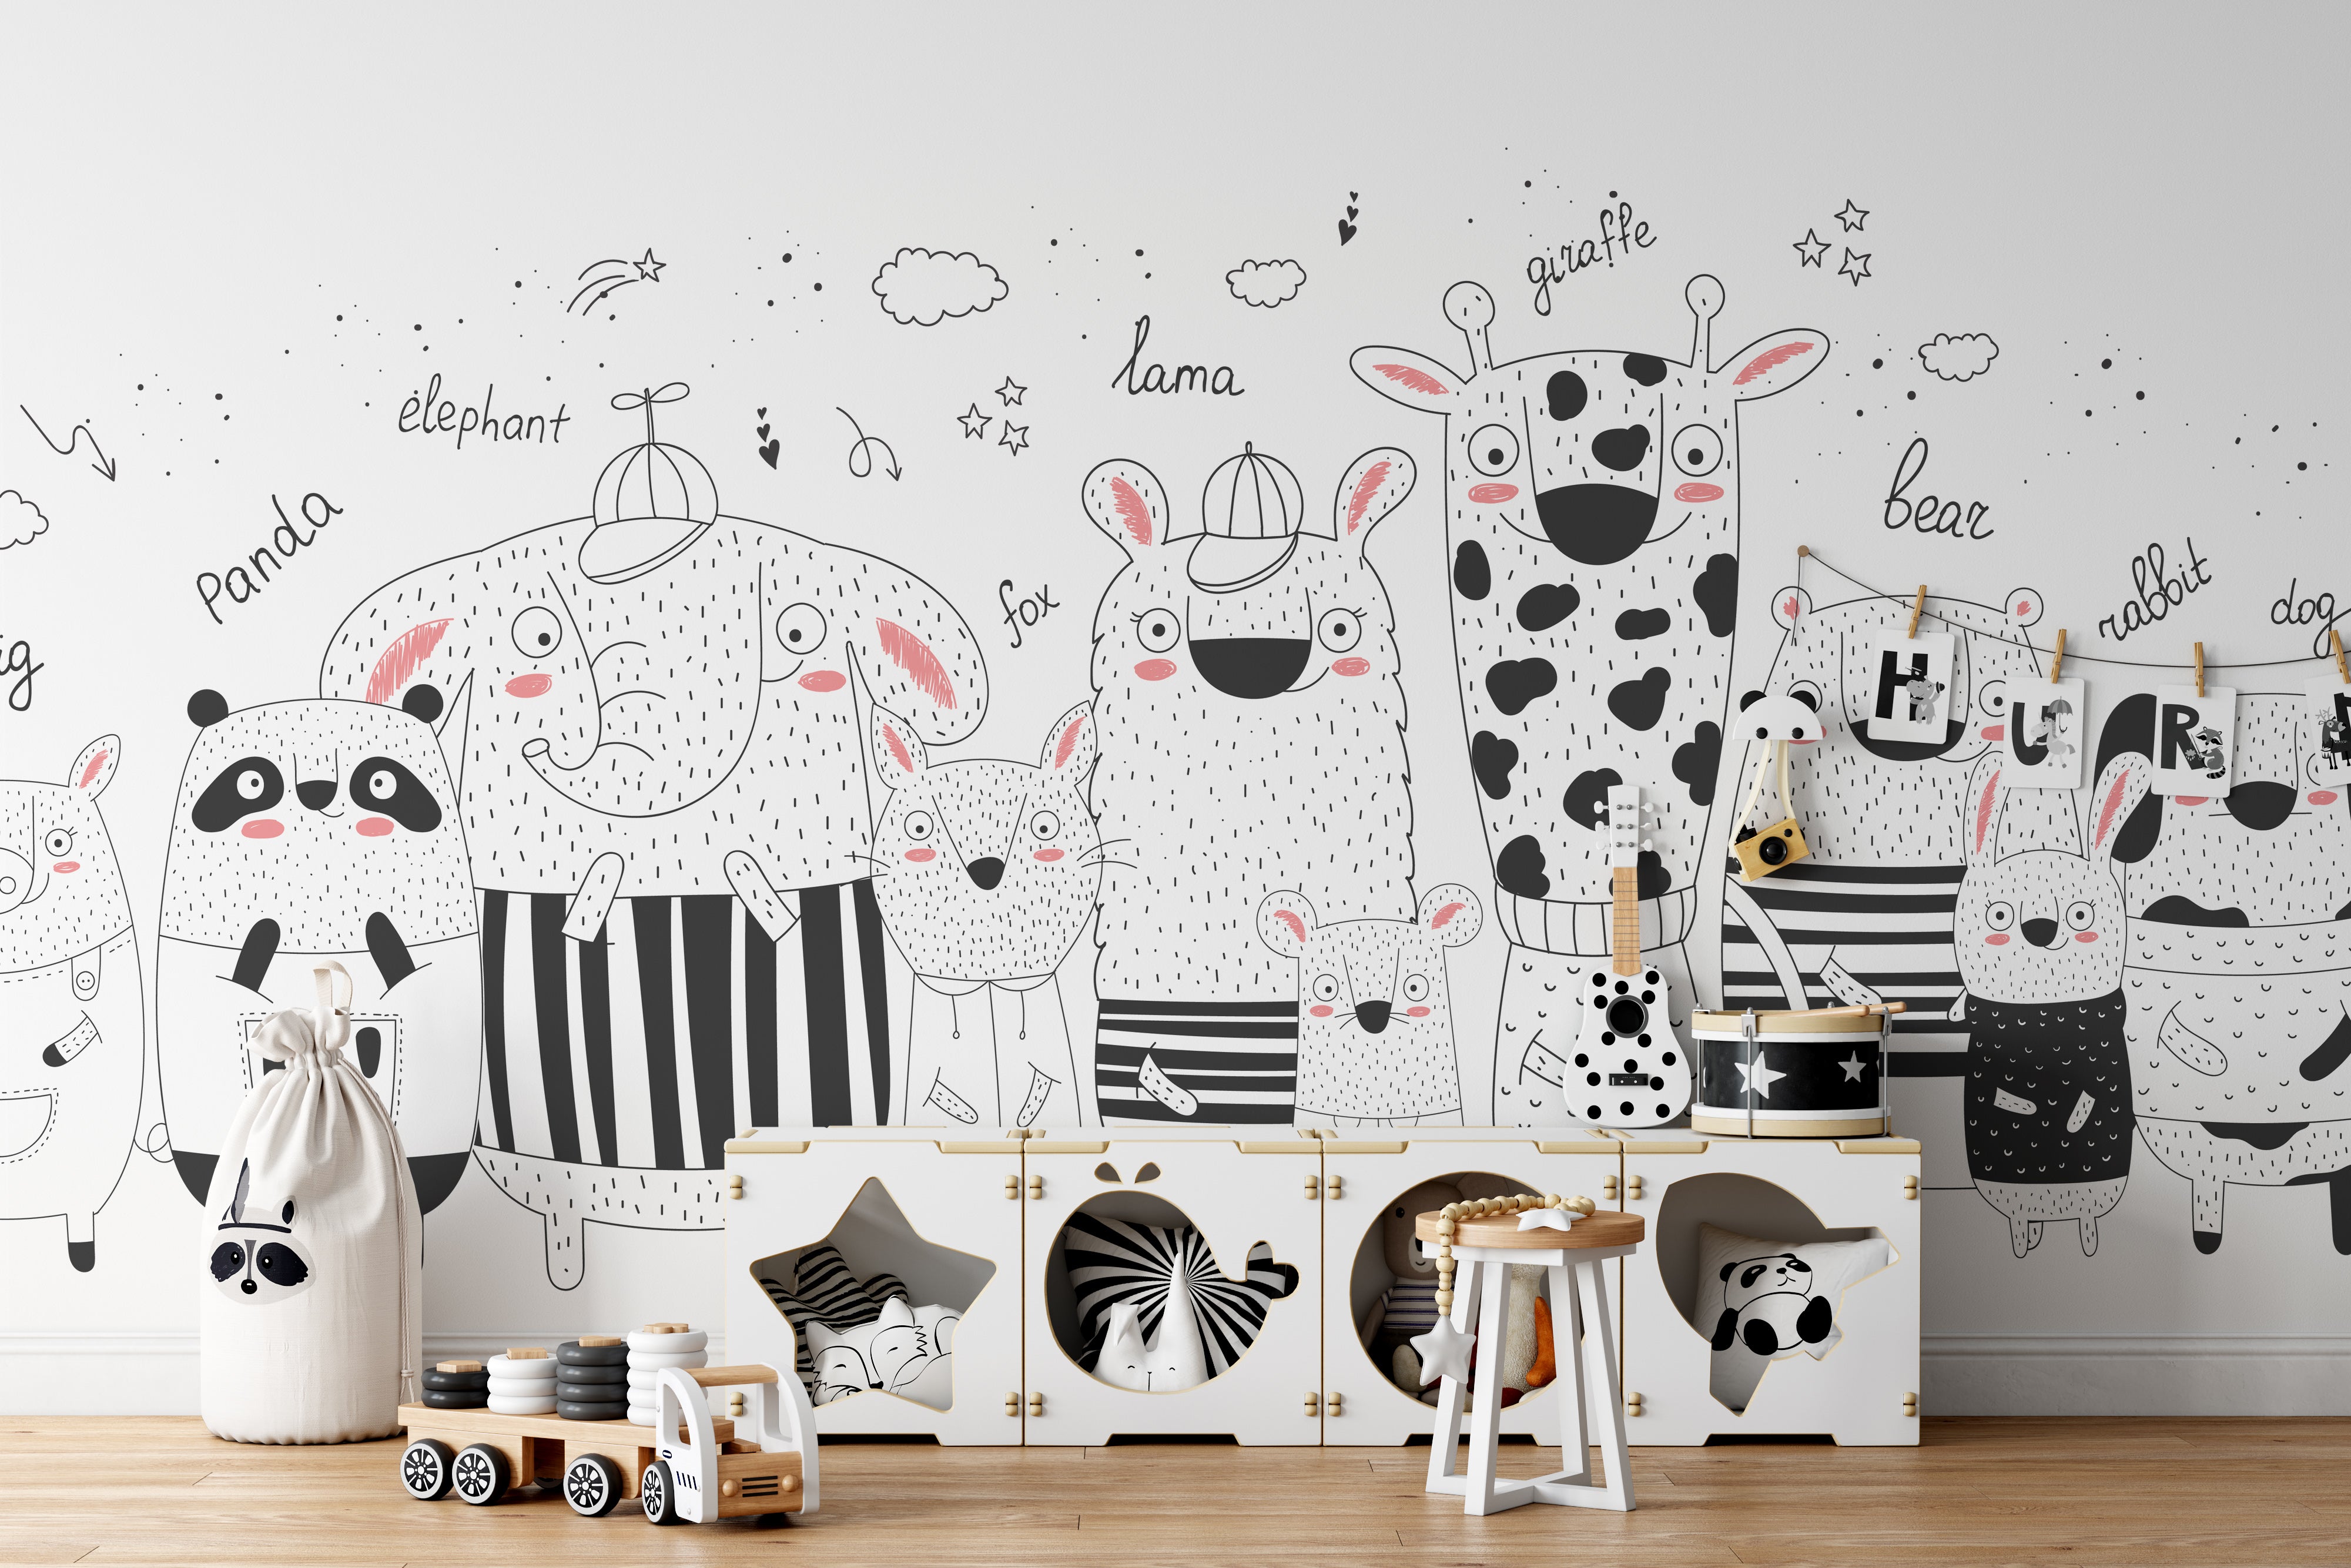 Spacious kids room featuring extensive animal mural with elephant, panda, giraffe, and lama characters